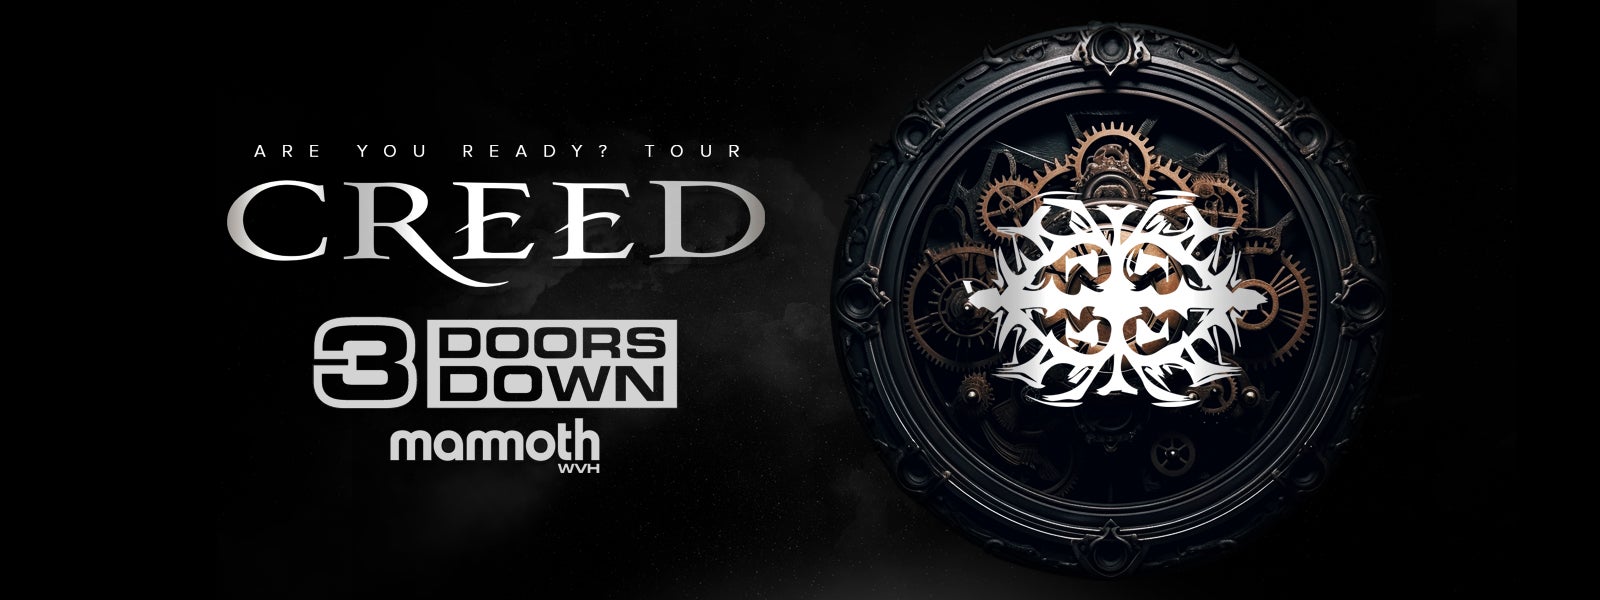 Creed: Are You Ready? Tour